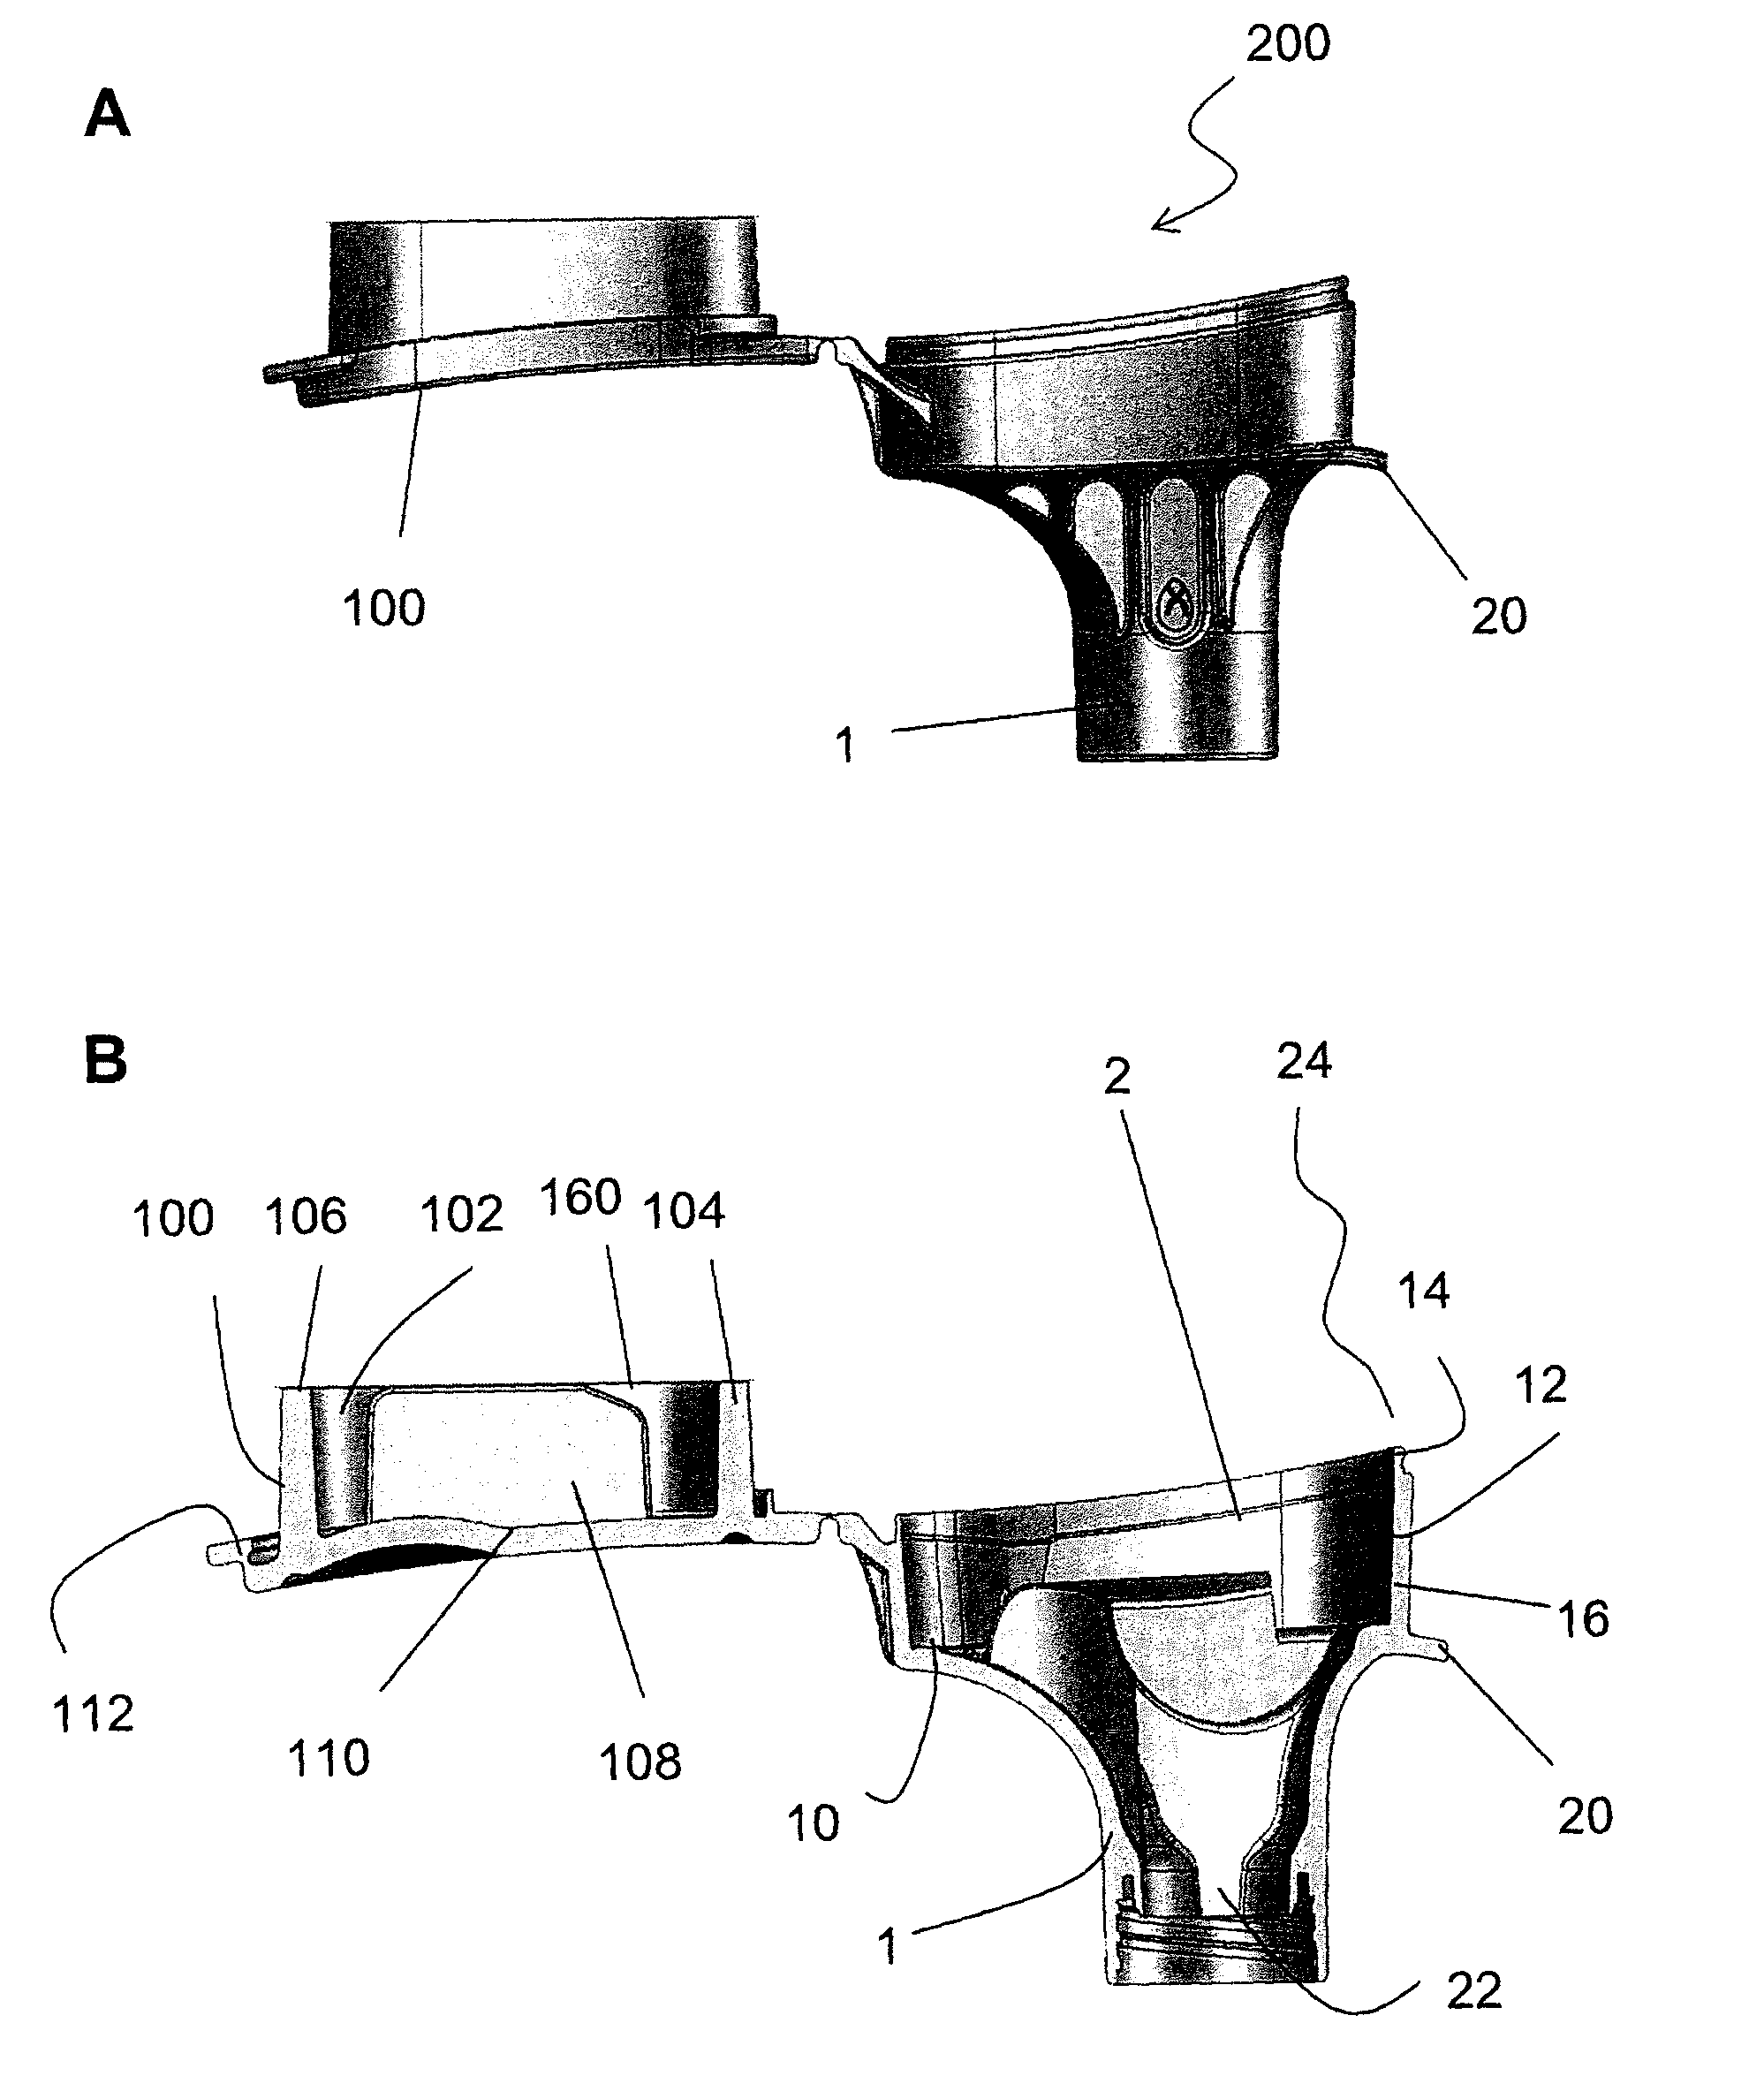 Sample receiving device